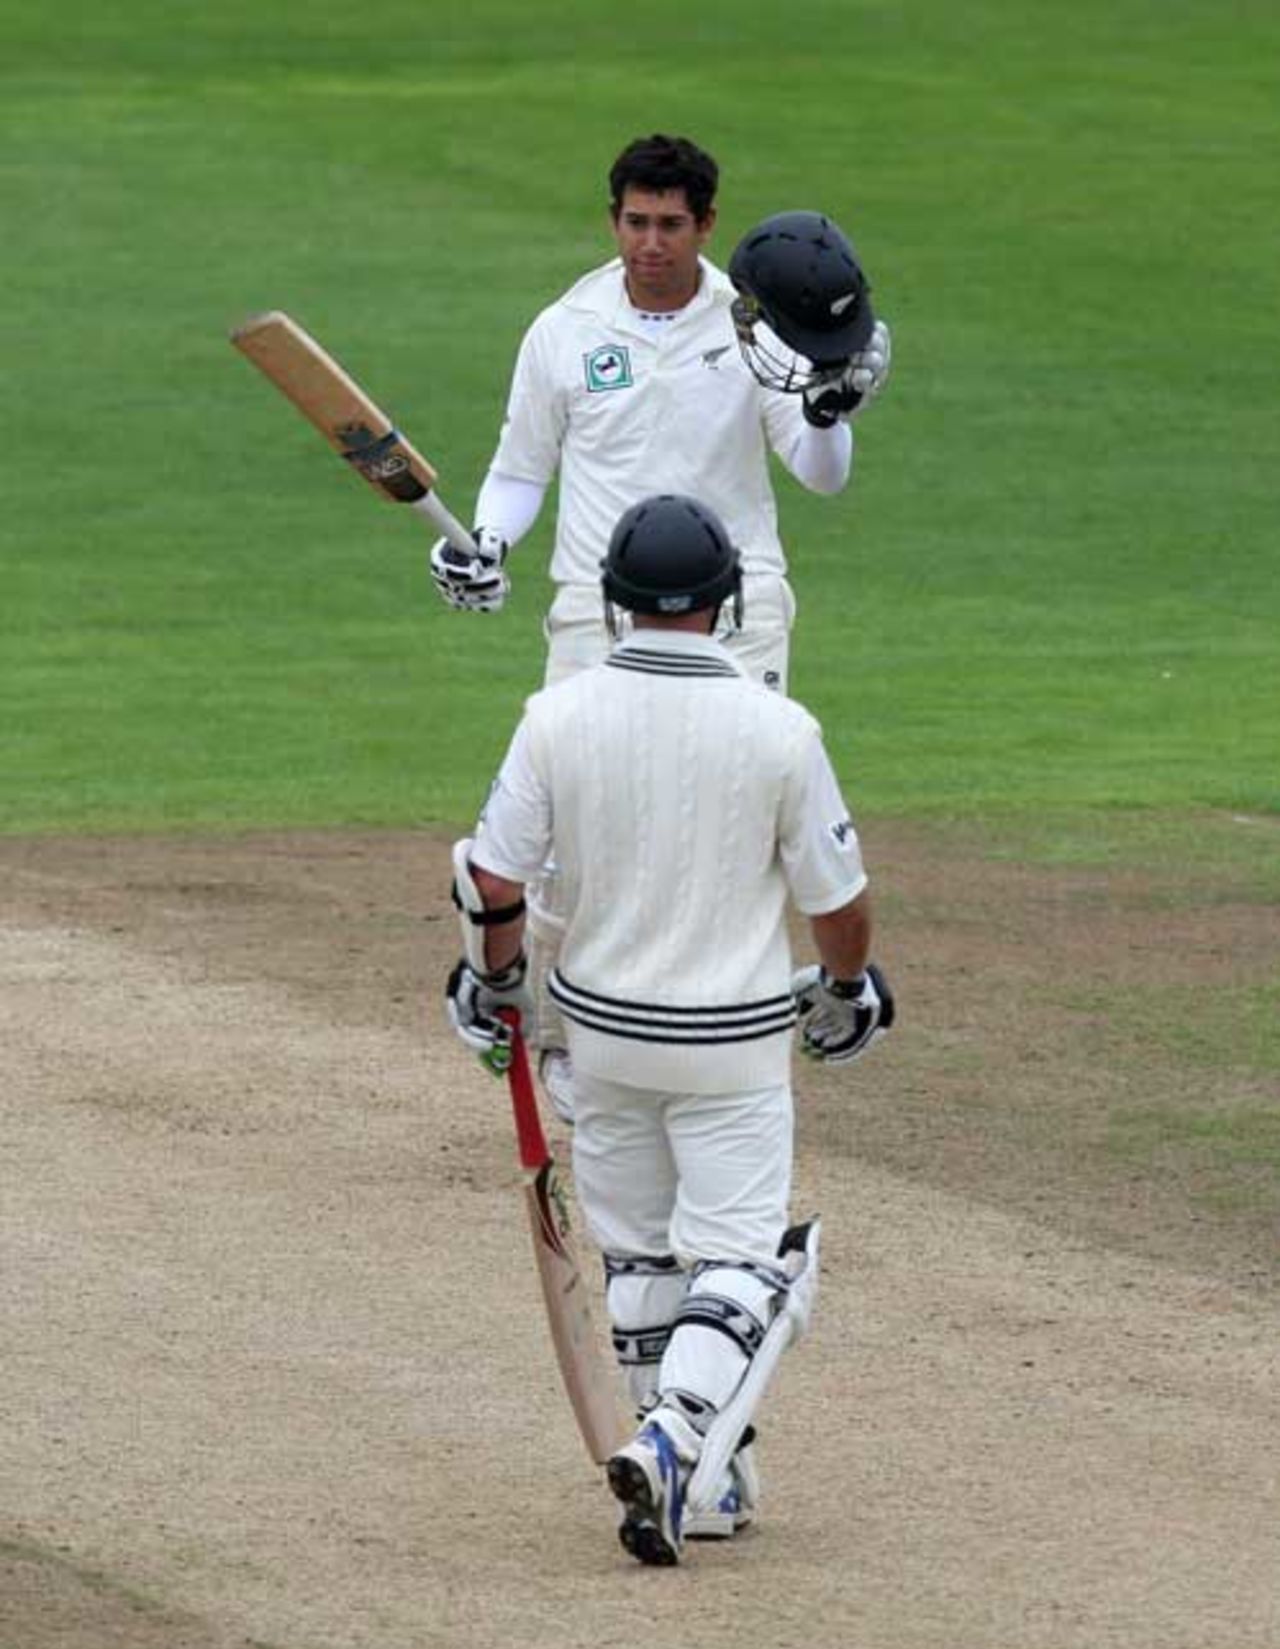 Ross Taylor celebrates his century against Northamptonshire, County Ground, 1 June 2008